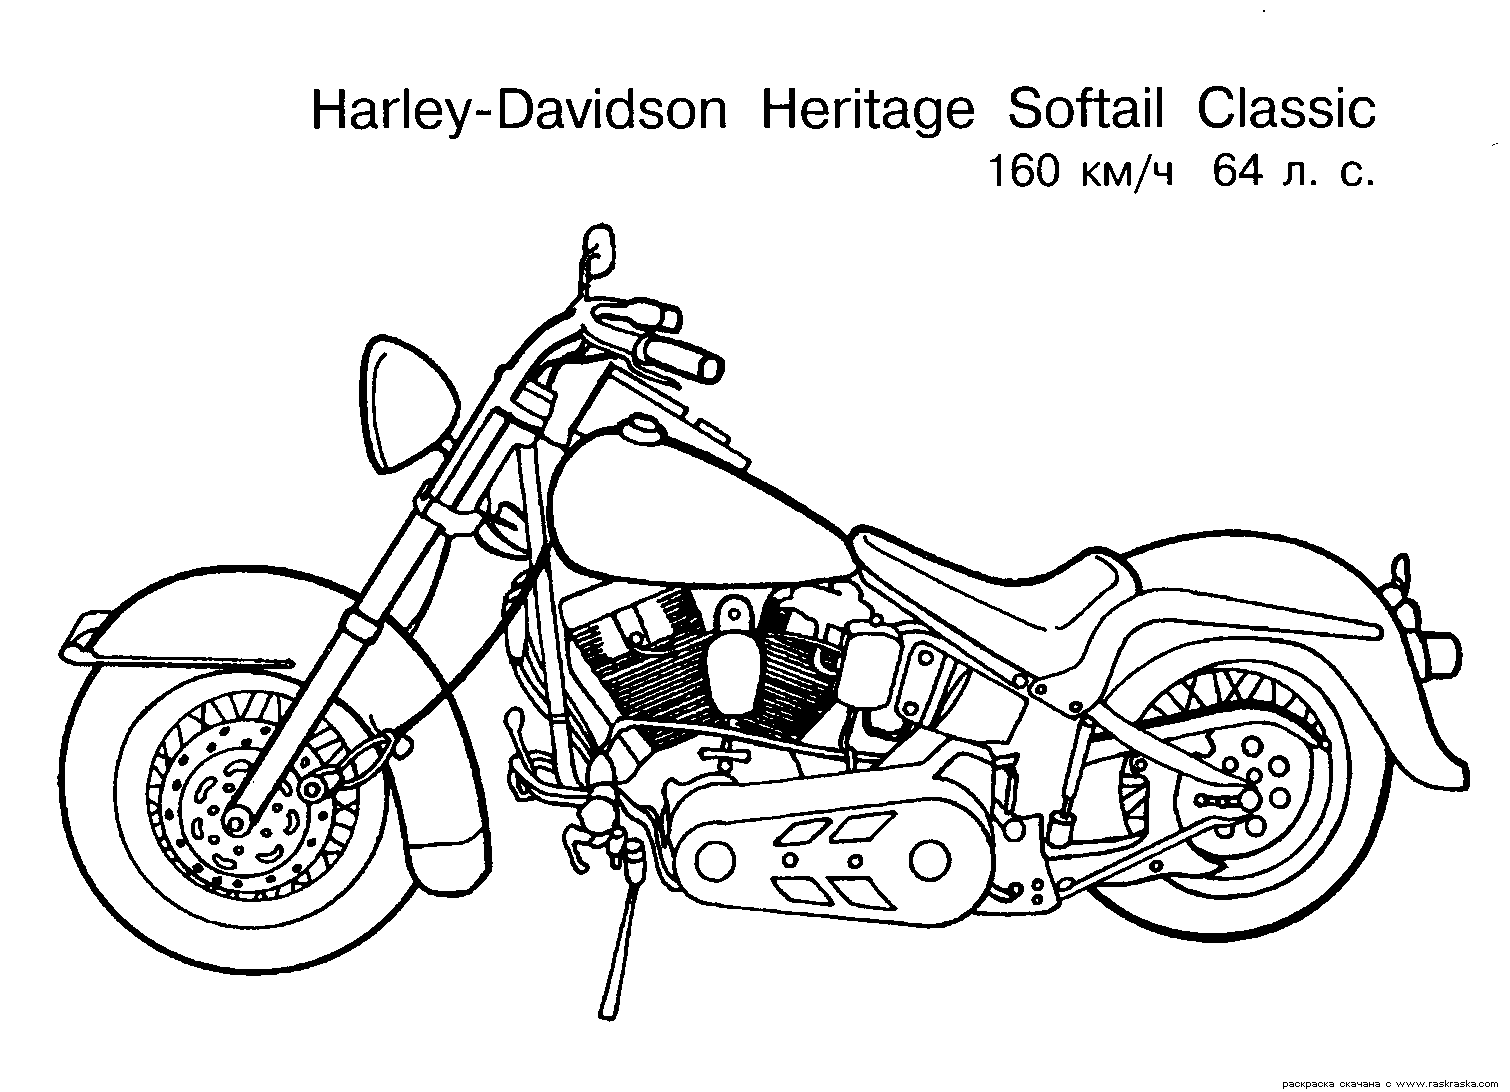  Free Motorcycle coloring page, letscoloringpages.com, Harley Davidson Heritage